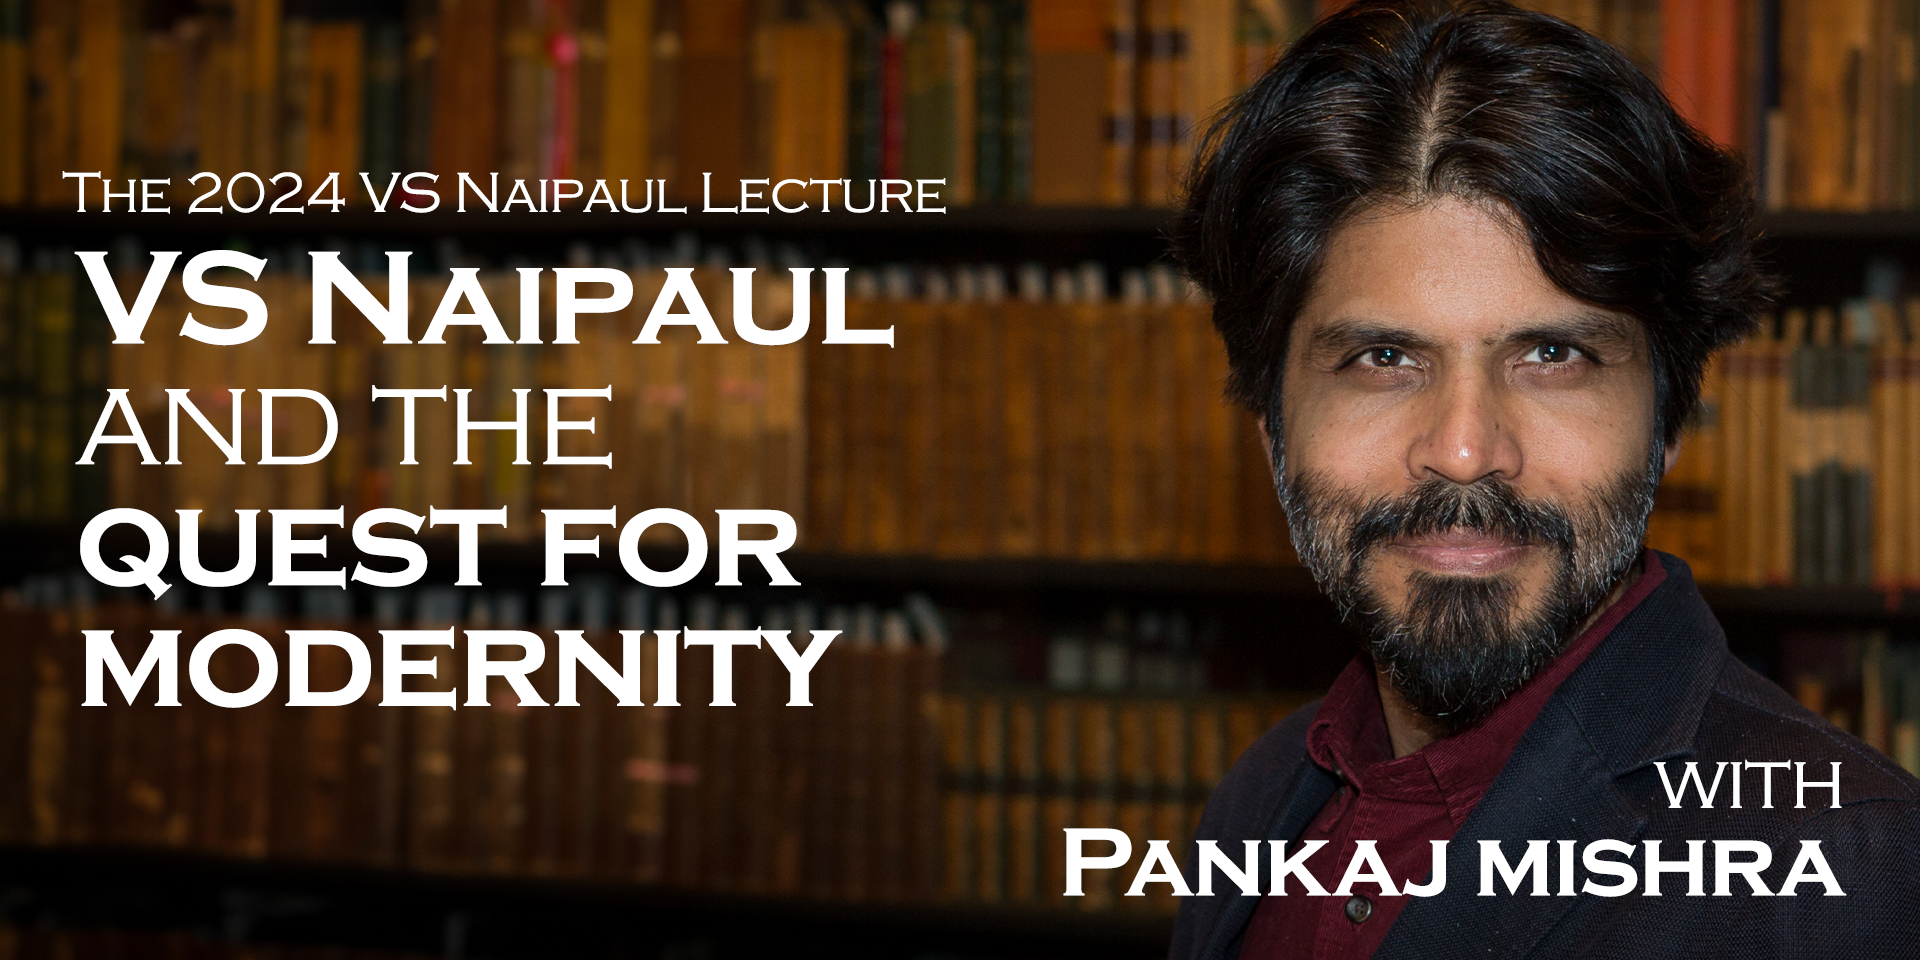 Pankaj Mishra Portrait Image with event title, "VS Naipaul and the Quest for Modernity"